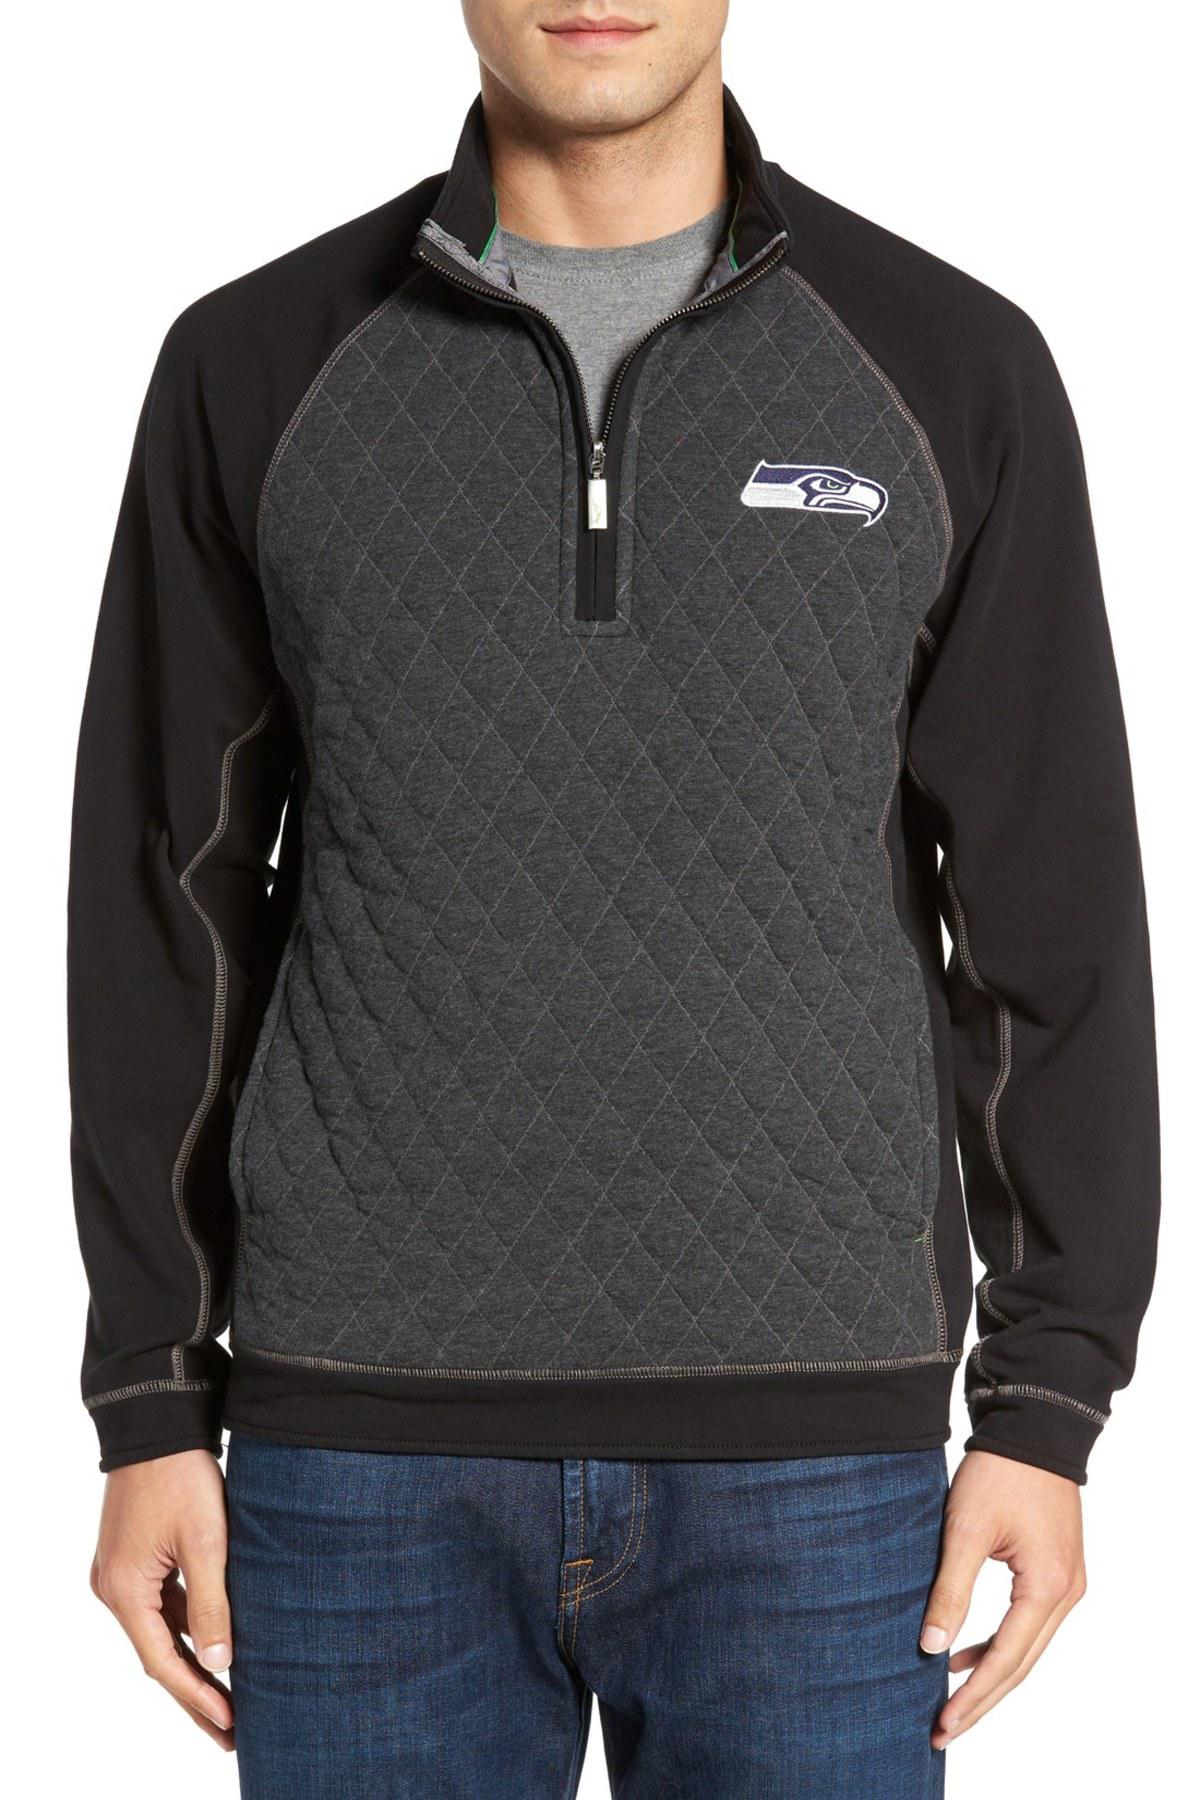 Download Lyst - Tommy Bahama 'nfl Gridiron' Quarter Zip Pullover ...